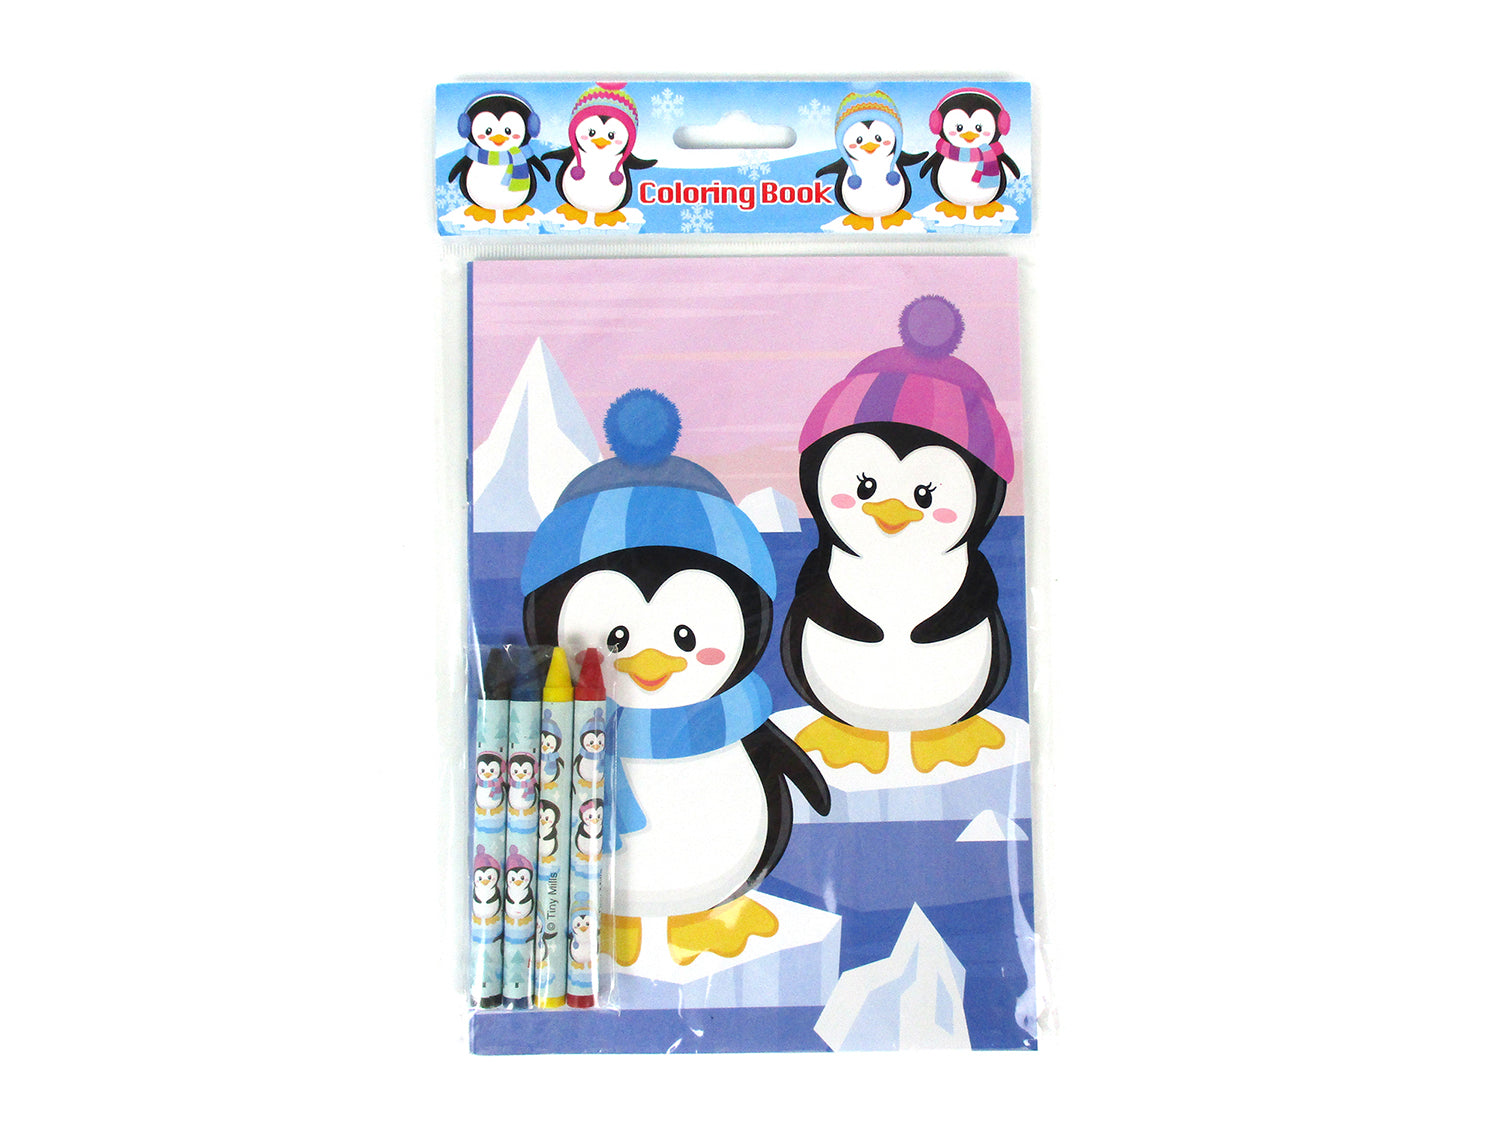 TINYMILLS Winter Snowman Penguins Coloring Book Crayon Set for Kids Party Favors with 12 Coloring Books and 48 Crayons for Holiday Goody Bag